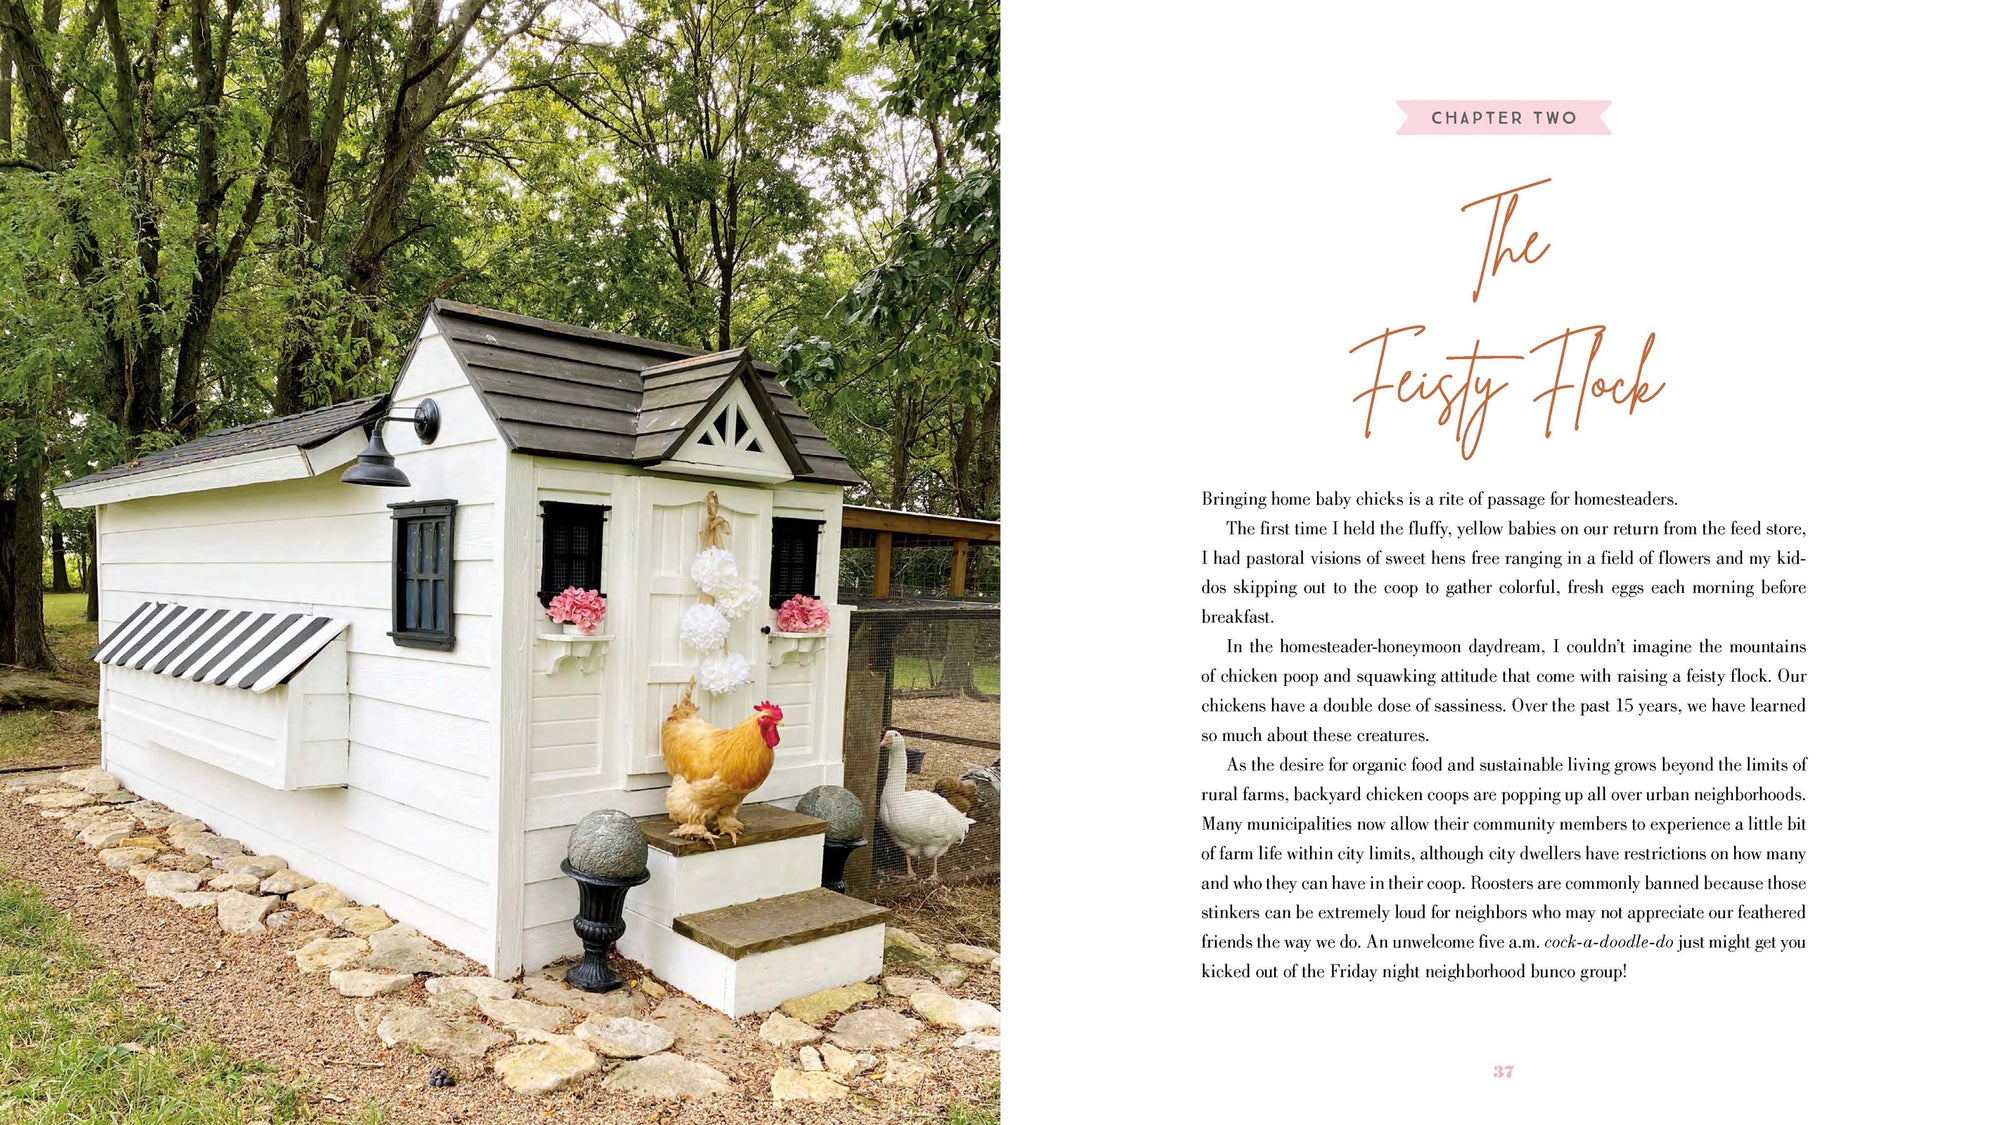 Book - The Grace-Filled Homestead